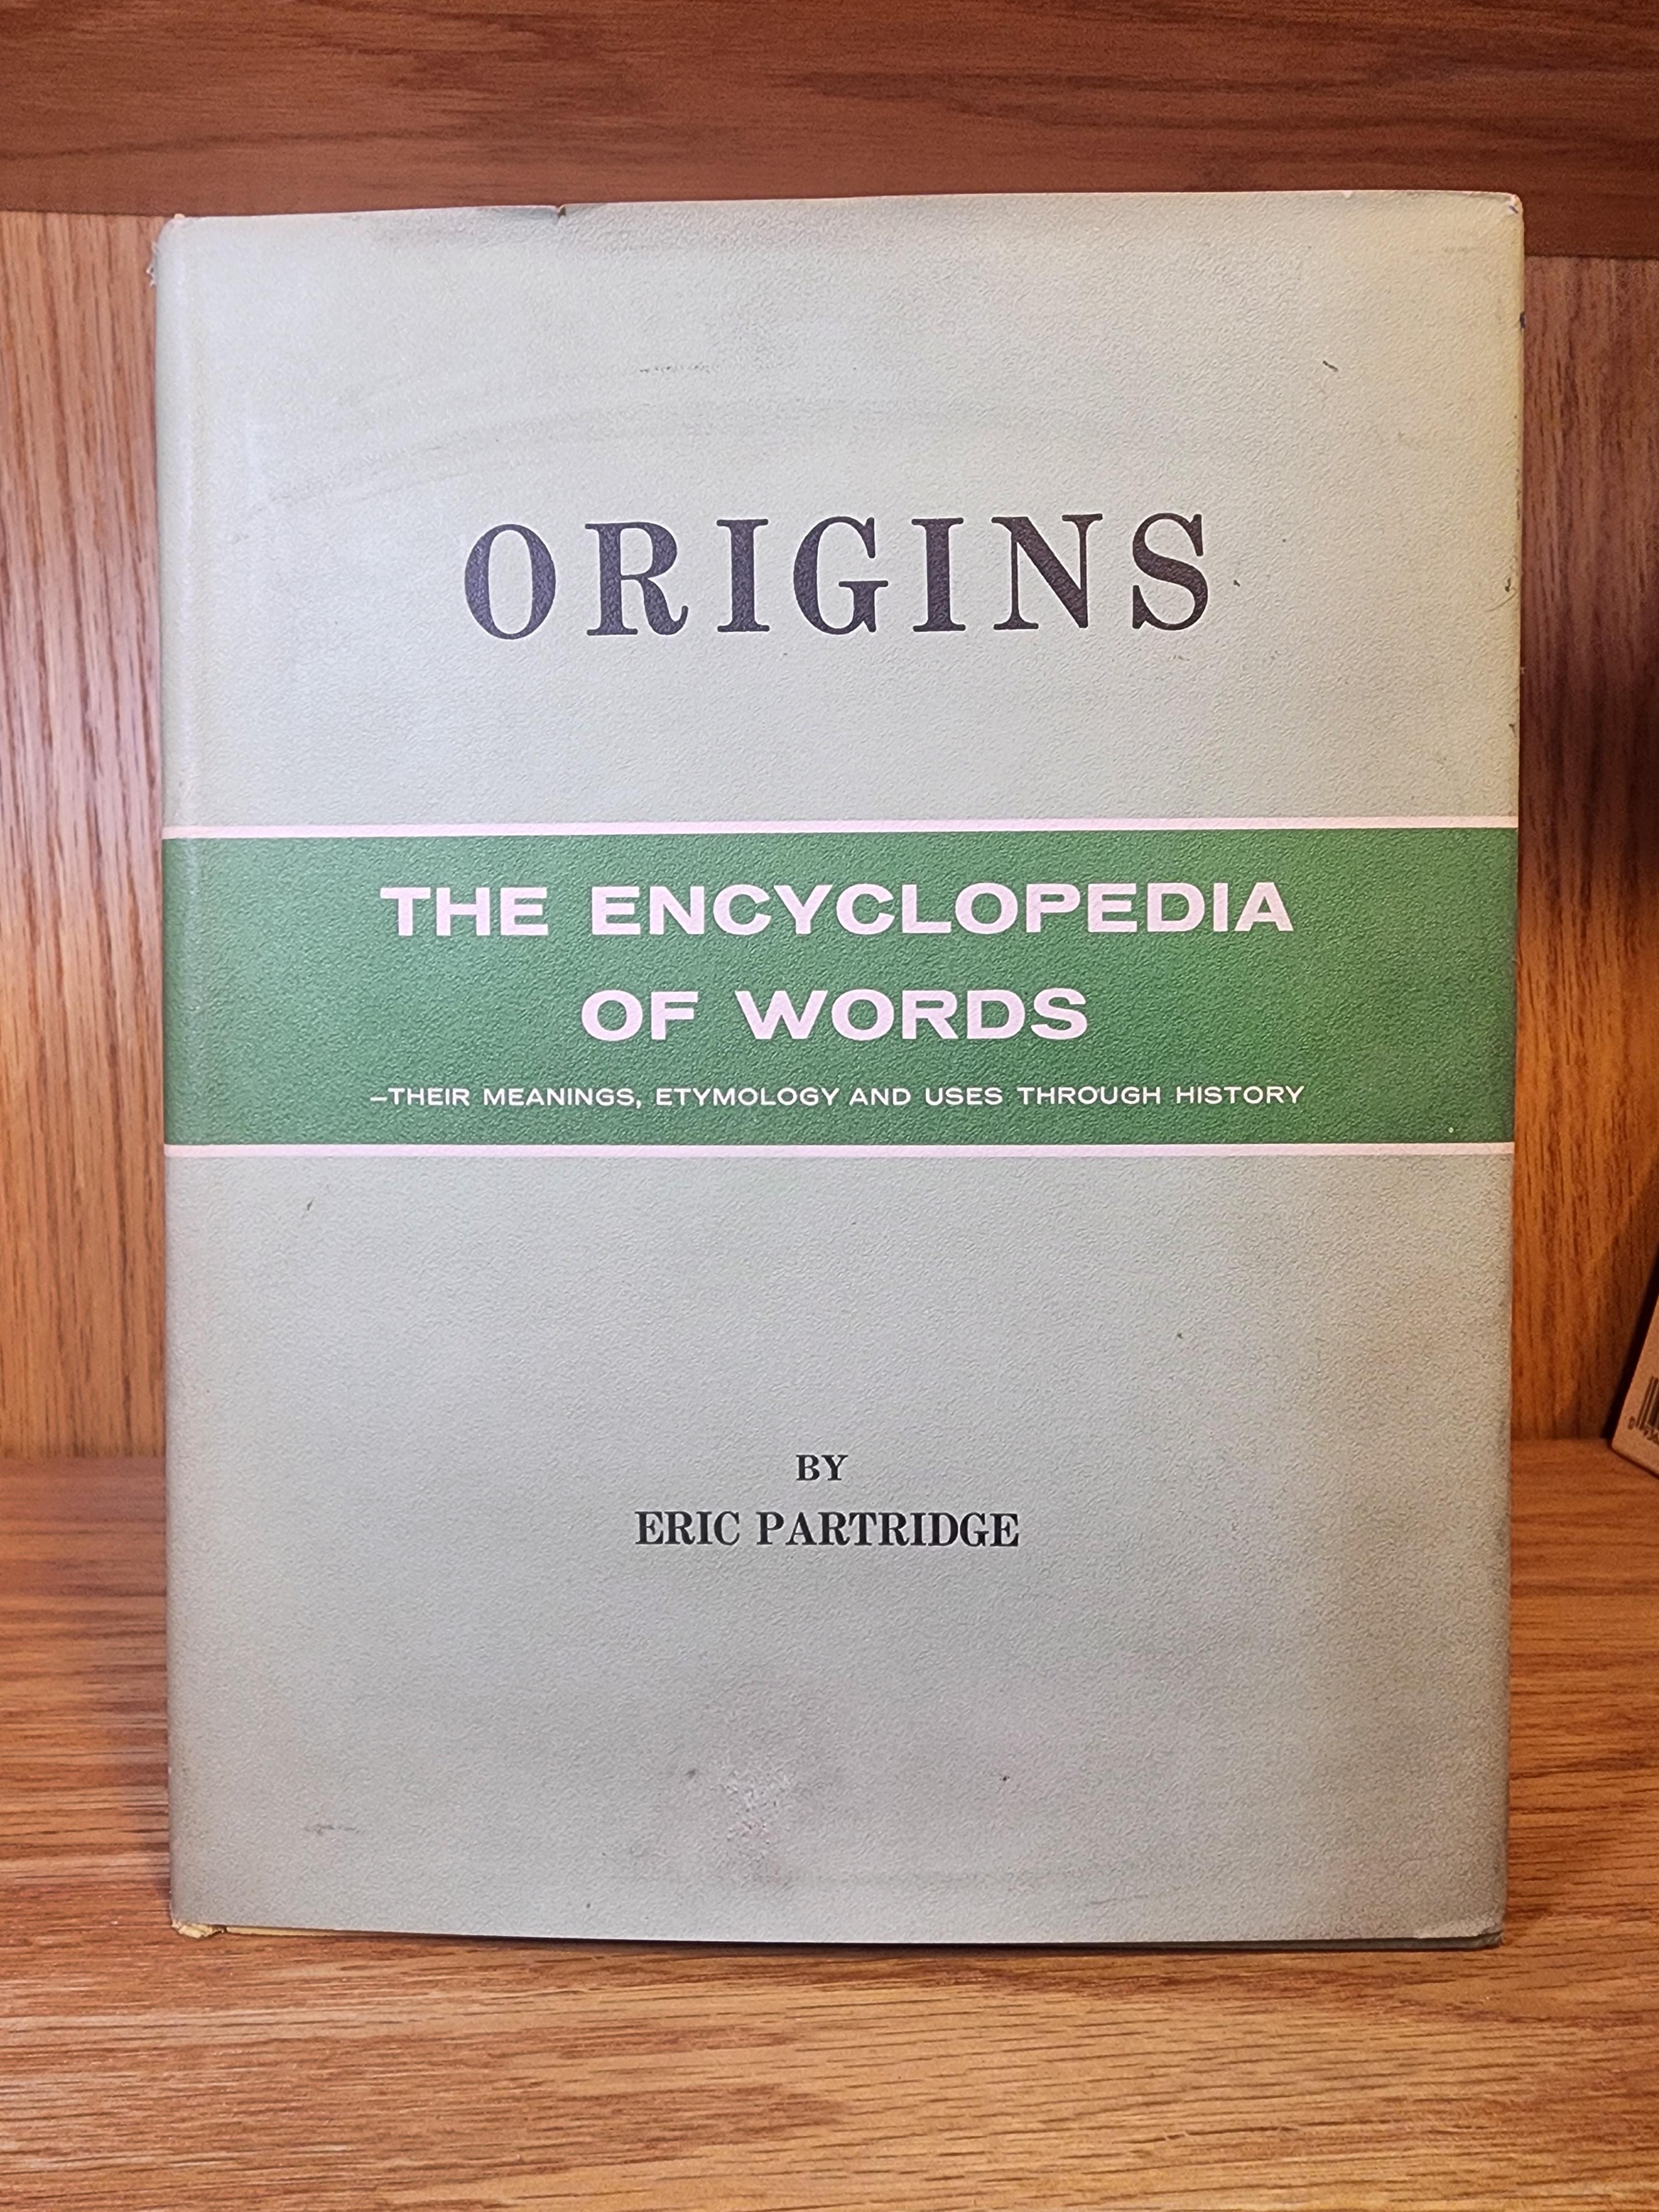 Origins: The Encyclopedia of Words- Their Meanings, Etymology and Uses Through History